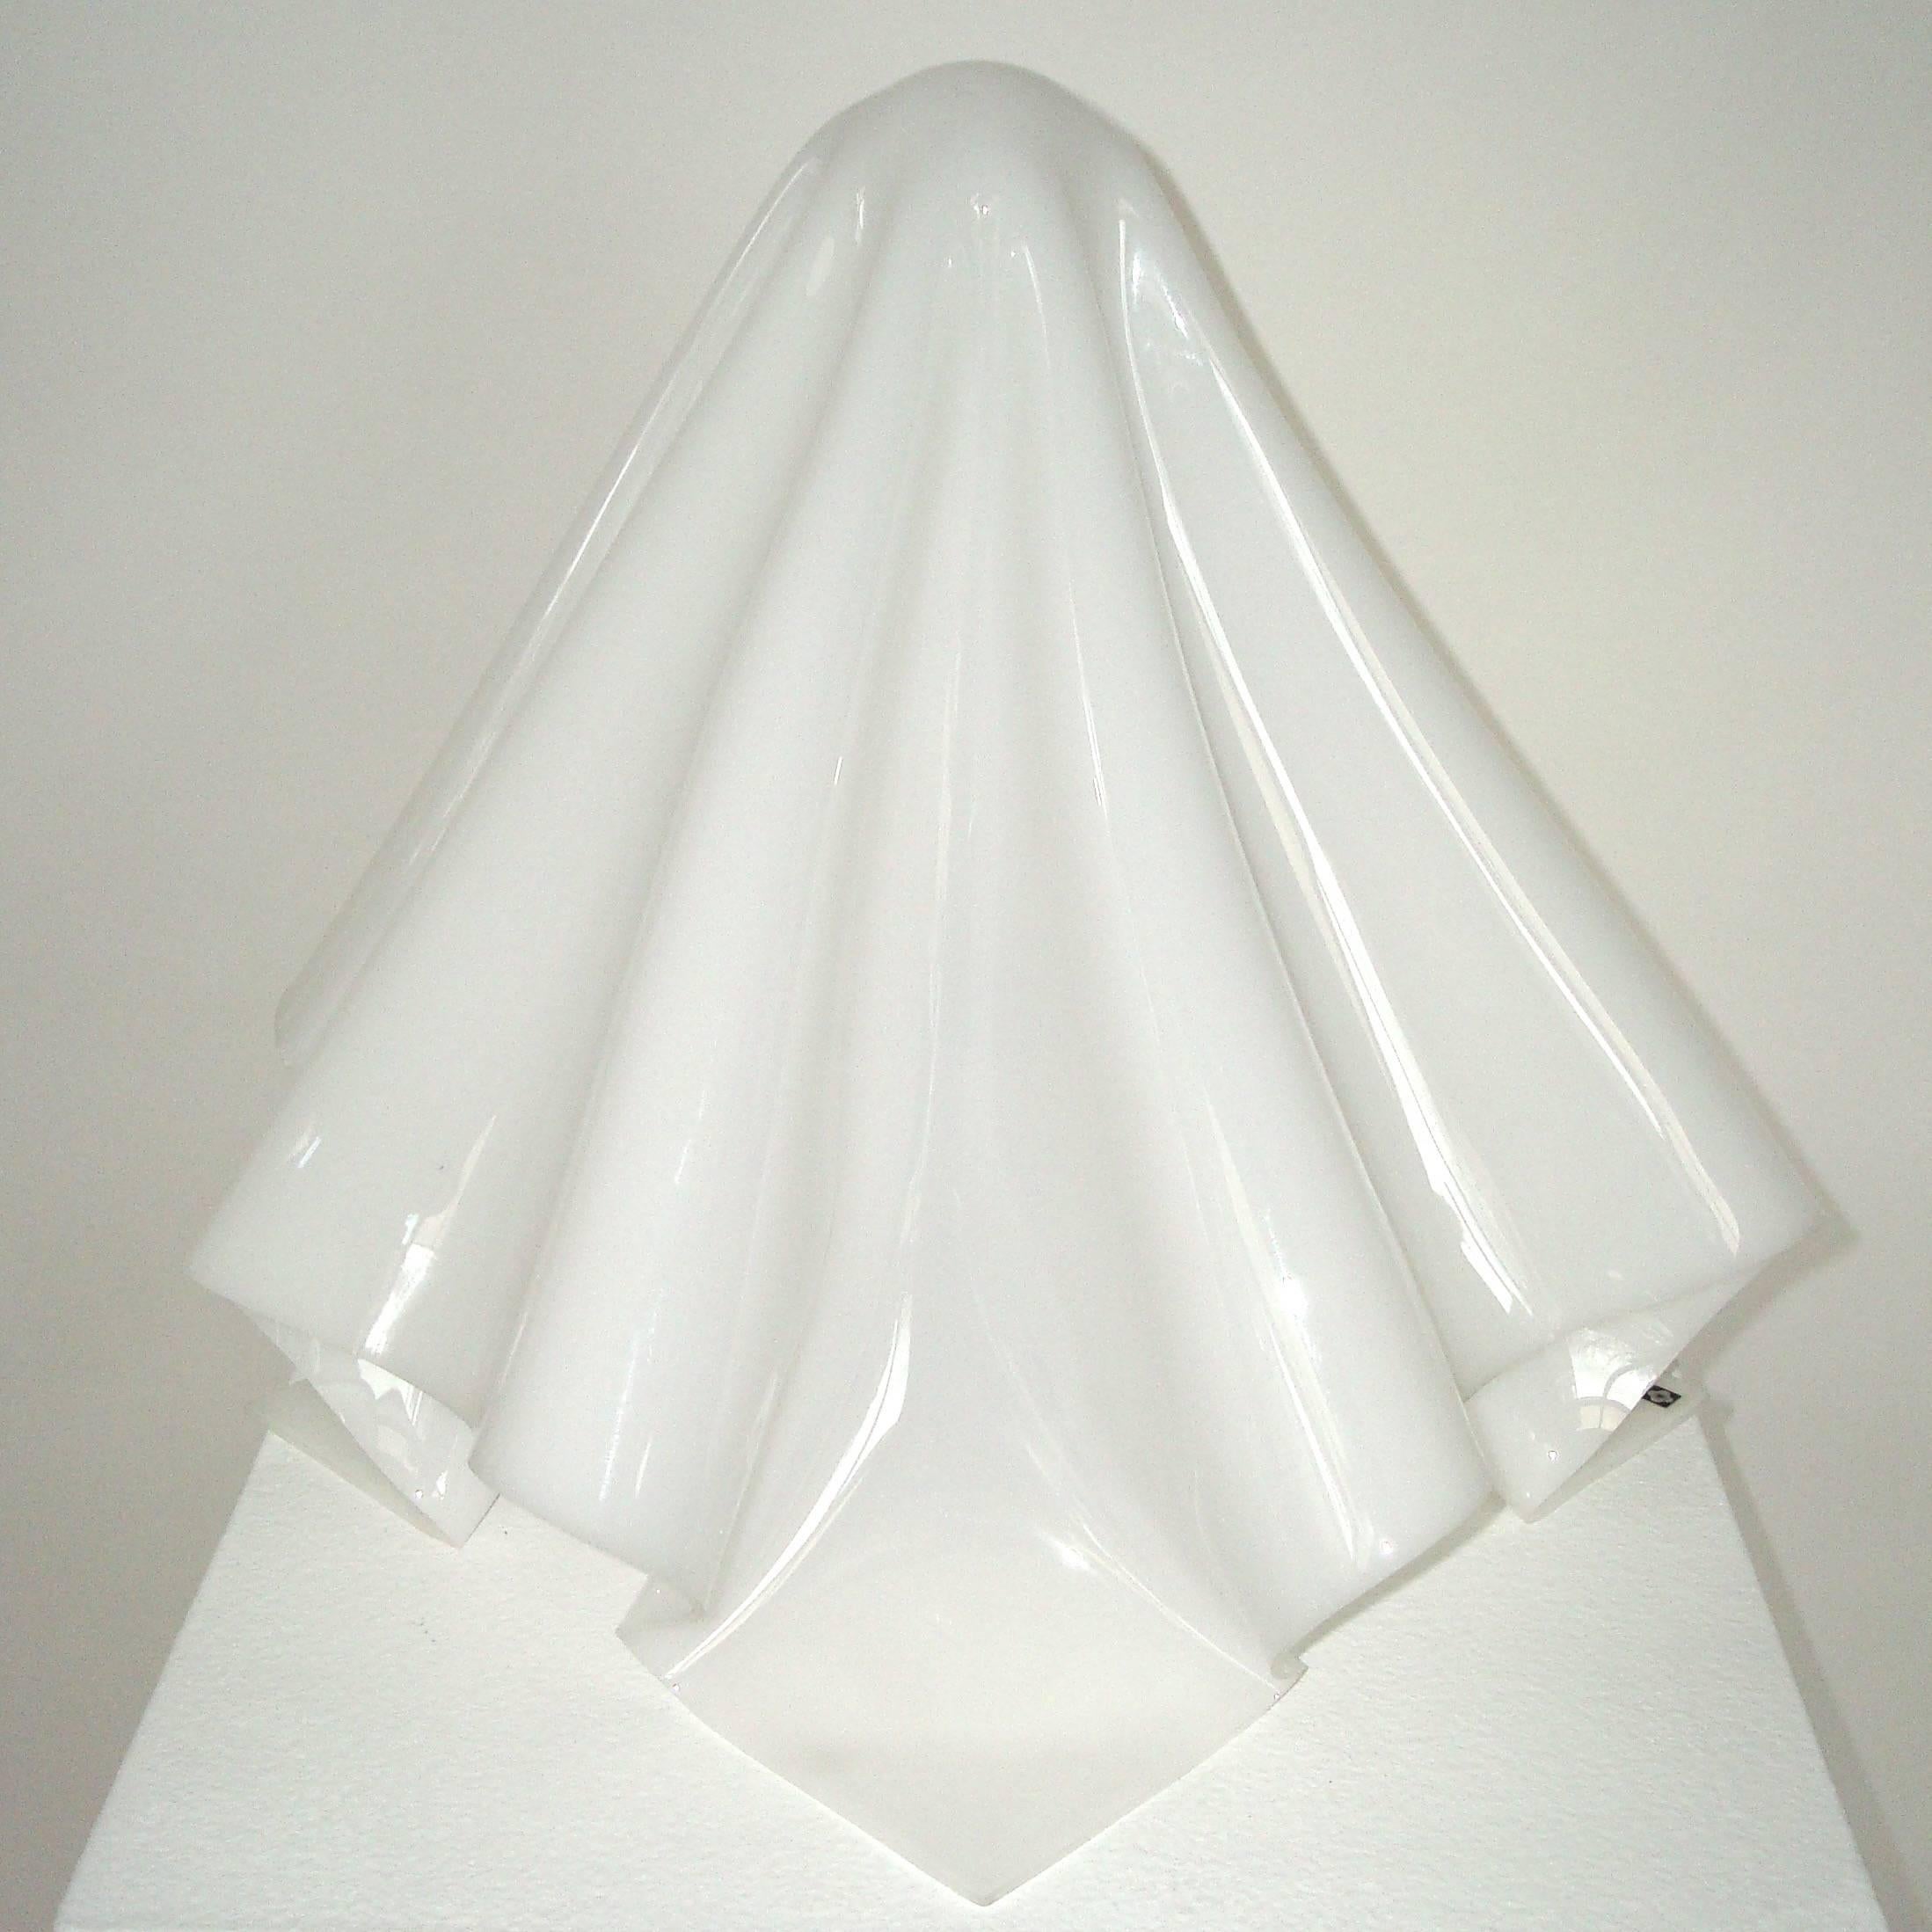 Shiro Kuramata K series table lamp or ghost lamp or OBA-Q lamp
The shade of molded sheet of acrylic is like a covering of soft, white cloth.
The light flowing throughout the shade casts a soft glow.
The shades are handmade, piece by piece, giving